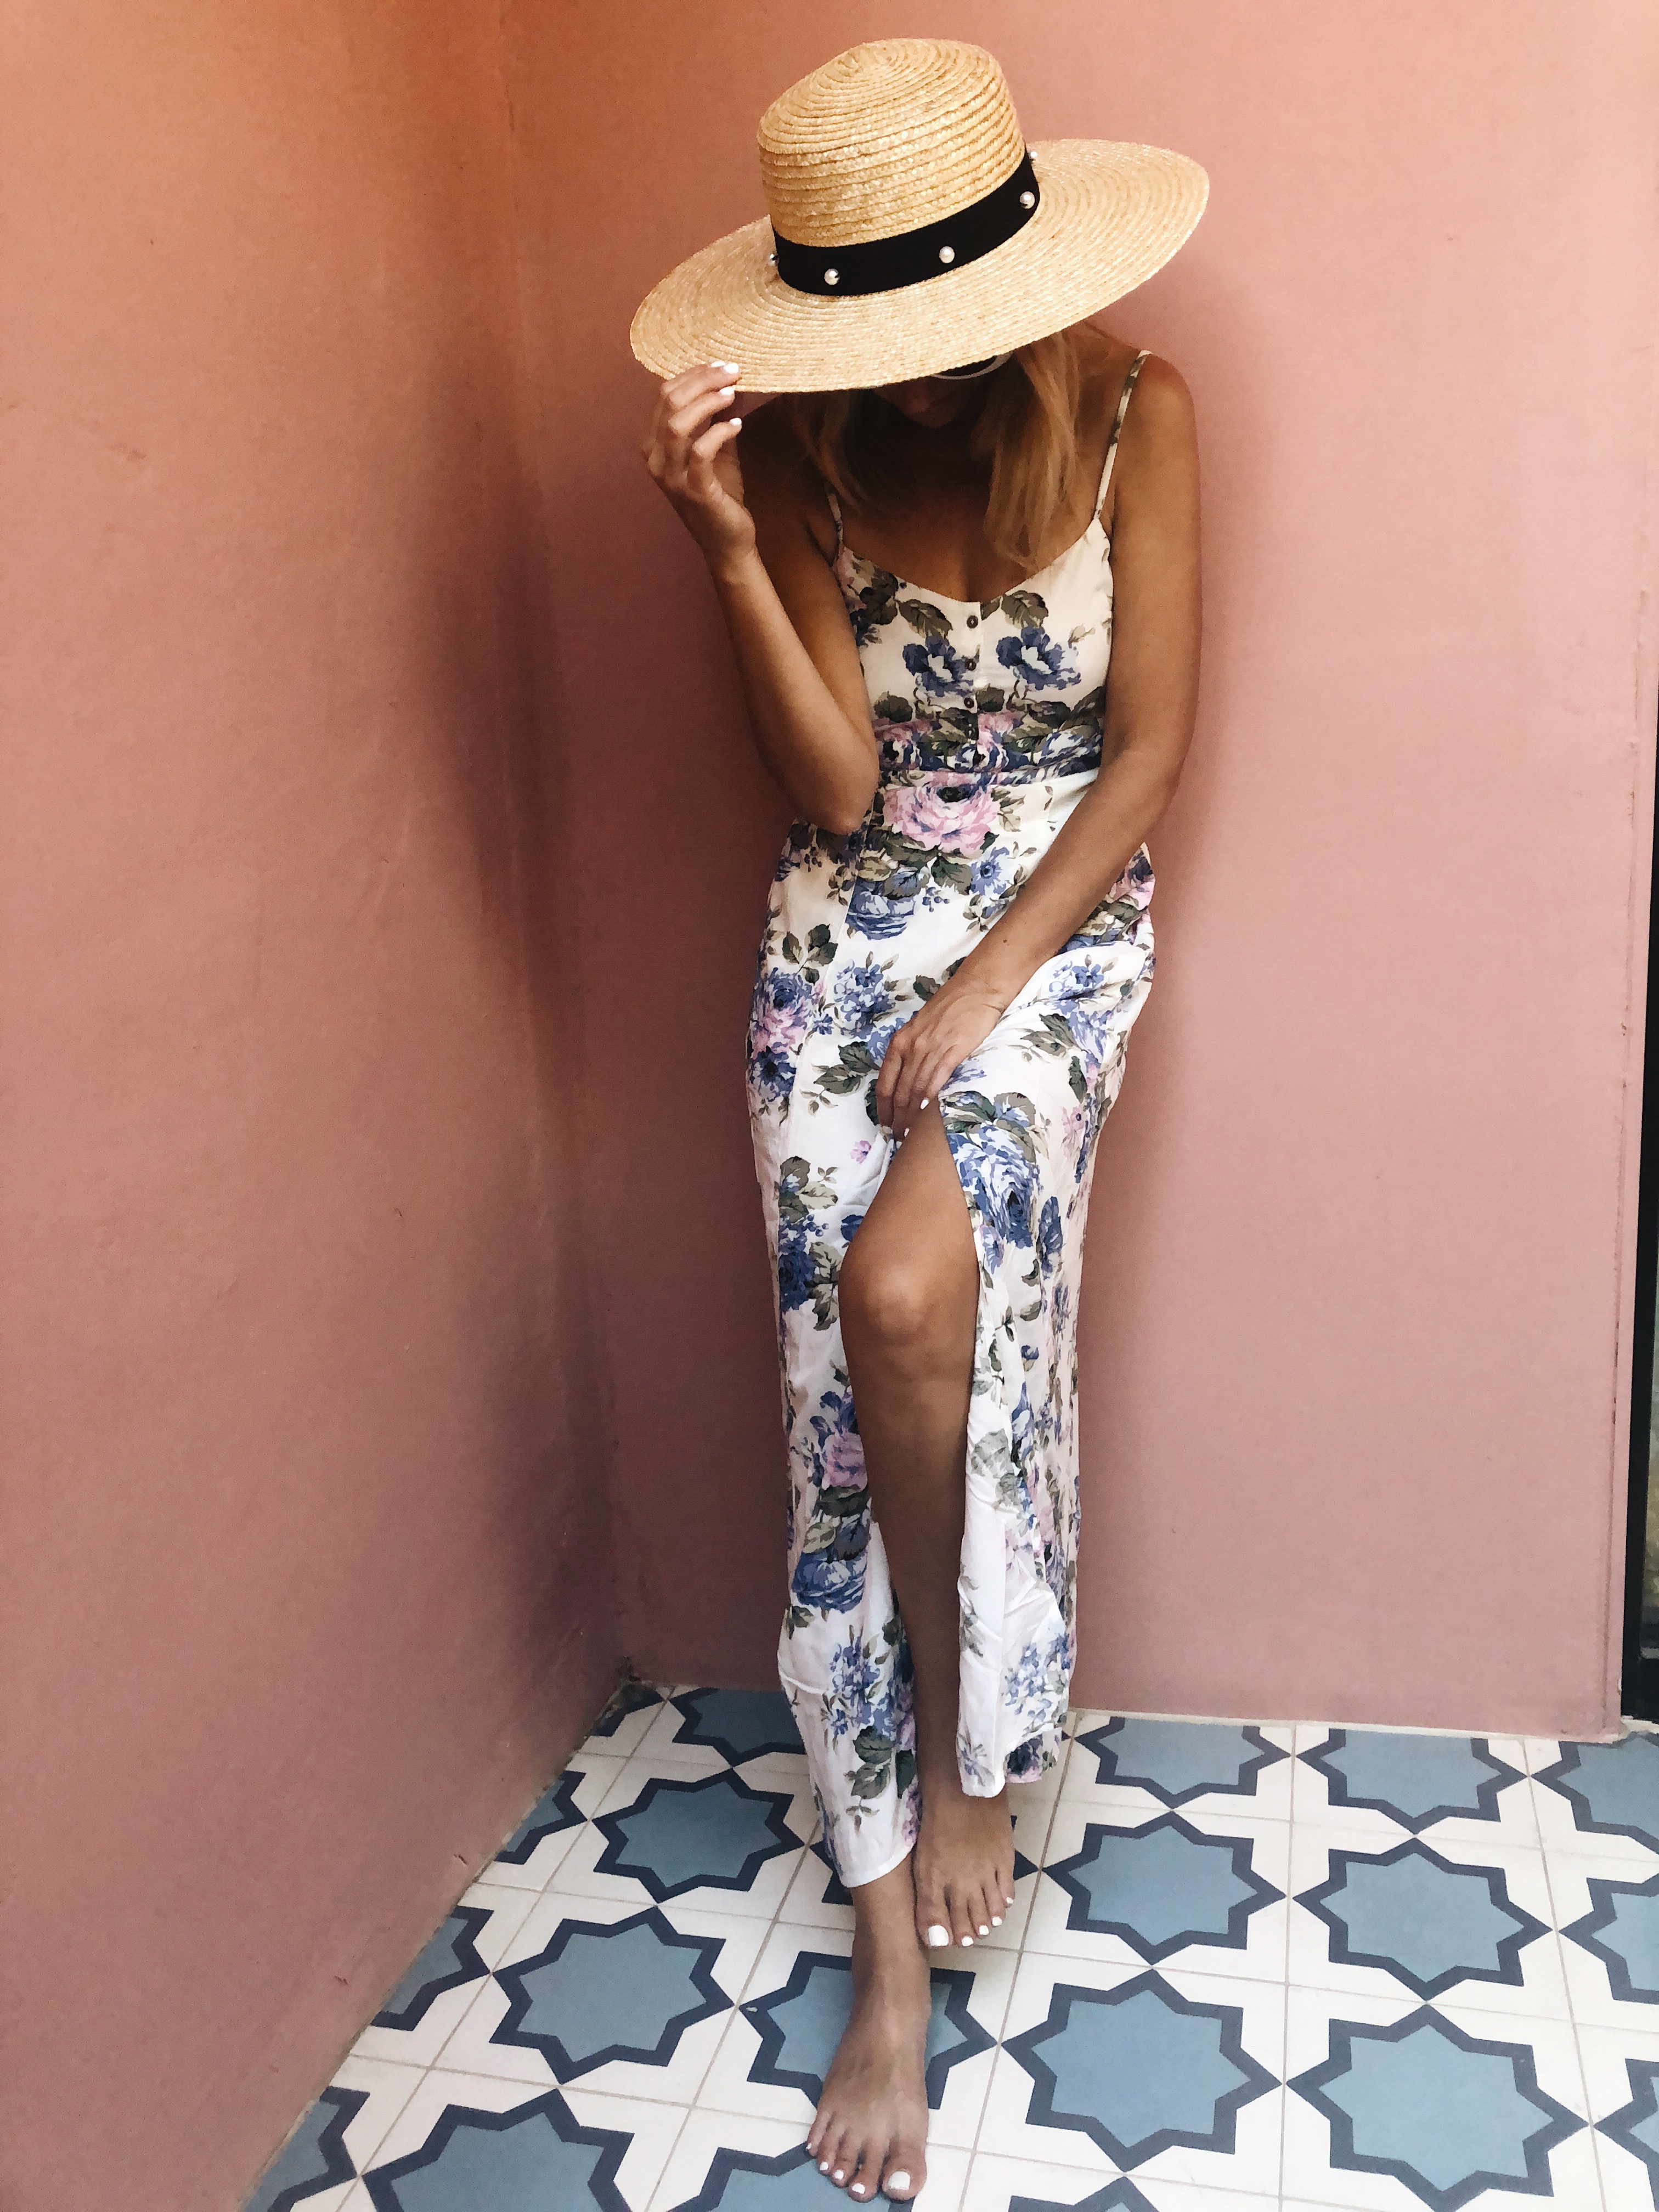 MUST HAVE SUMMER MAXI DRESSES- Jaclyn De Leon Style + floral maxi dress + boho chic + bohemian summer stye + straw hat + retro sunglasses + abercrombie & fitch + casual beach style + street style